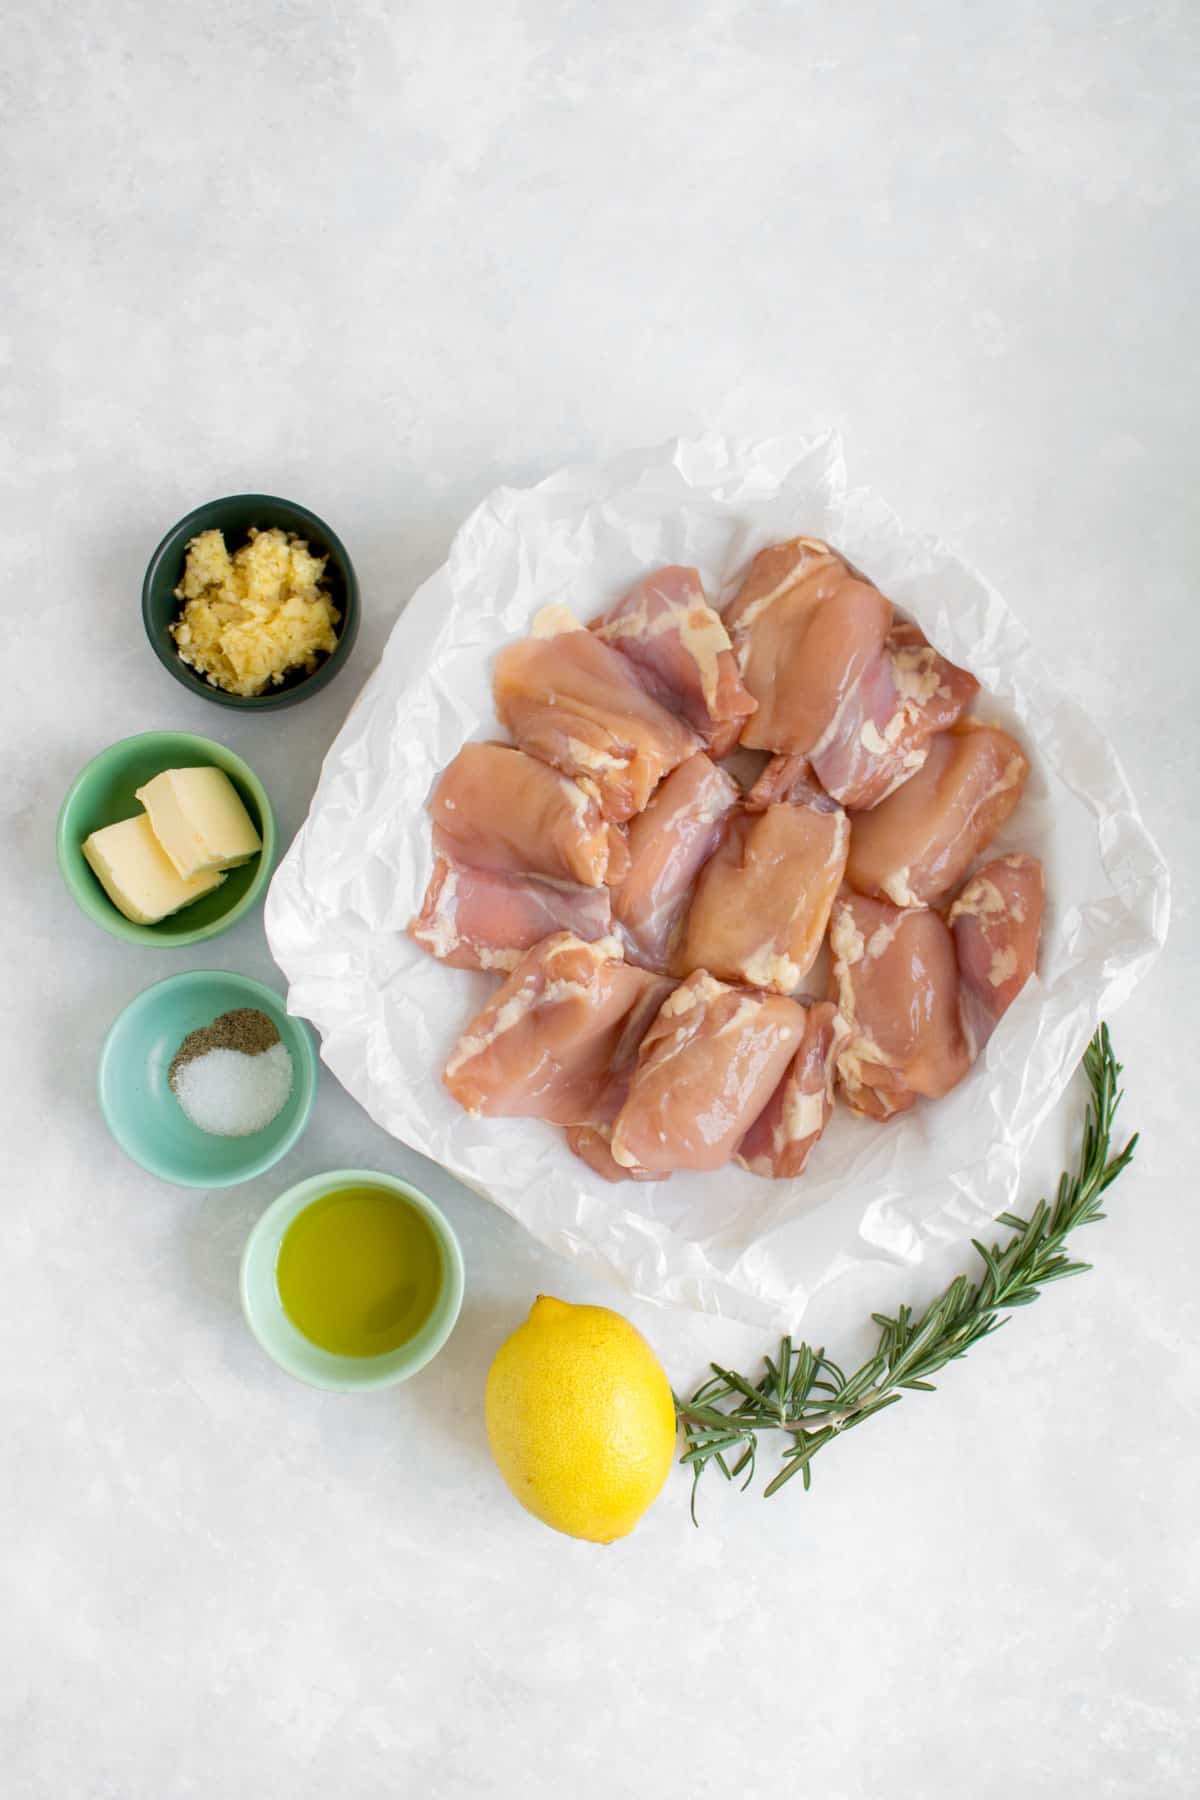 Ingredients needed to make lemon rosemary chicken thighs with garlic butter.